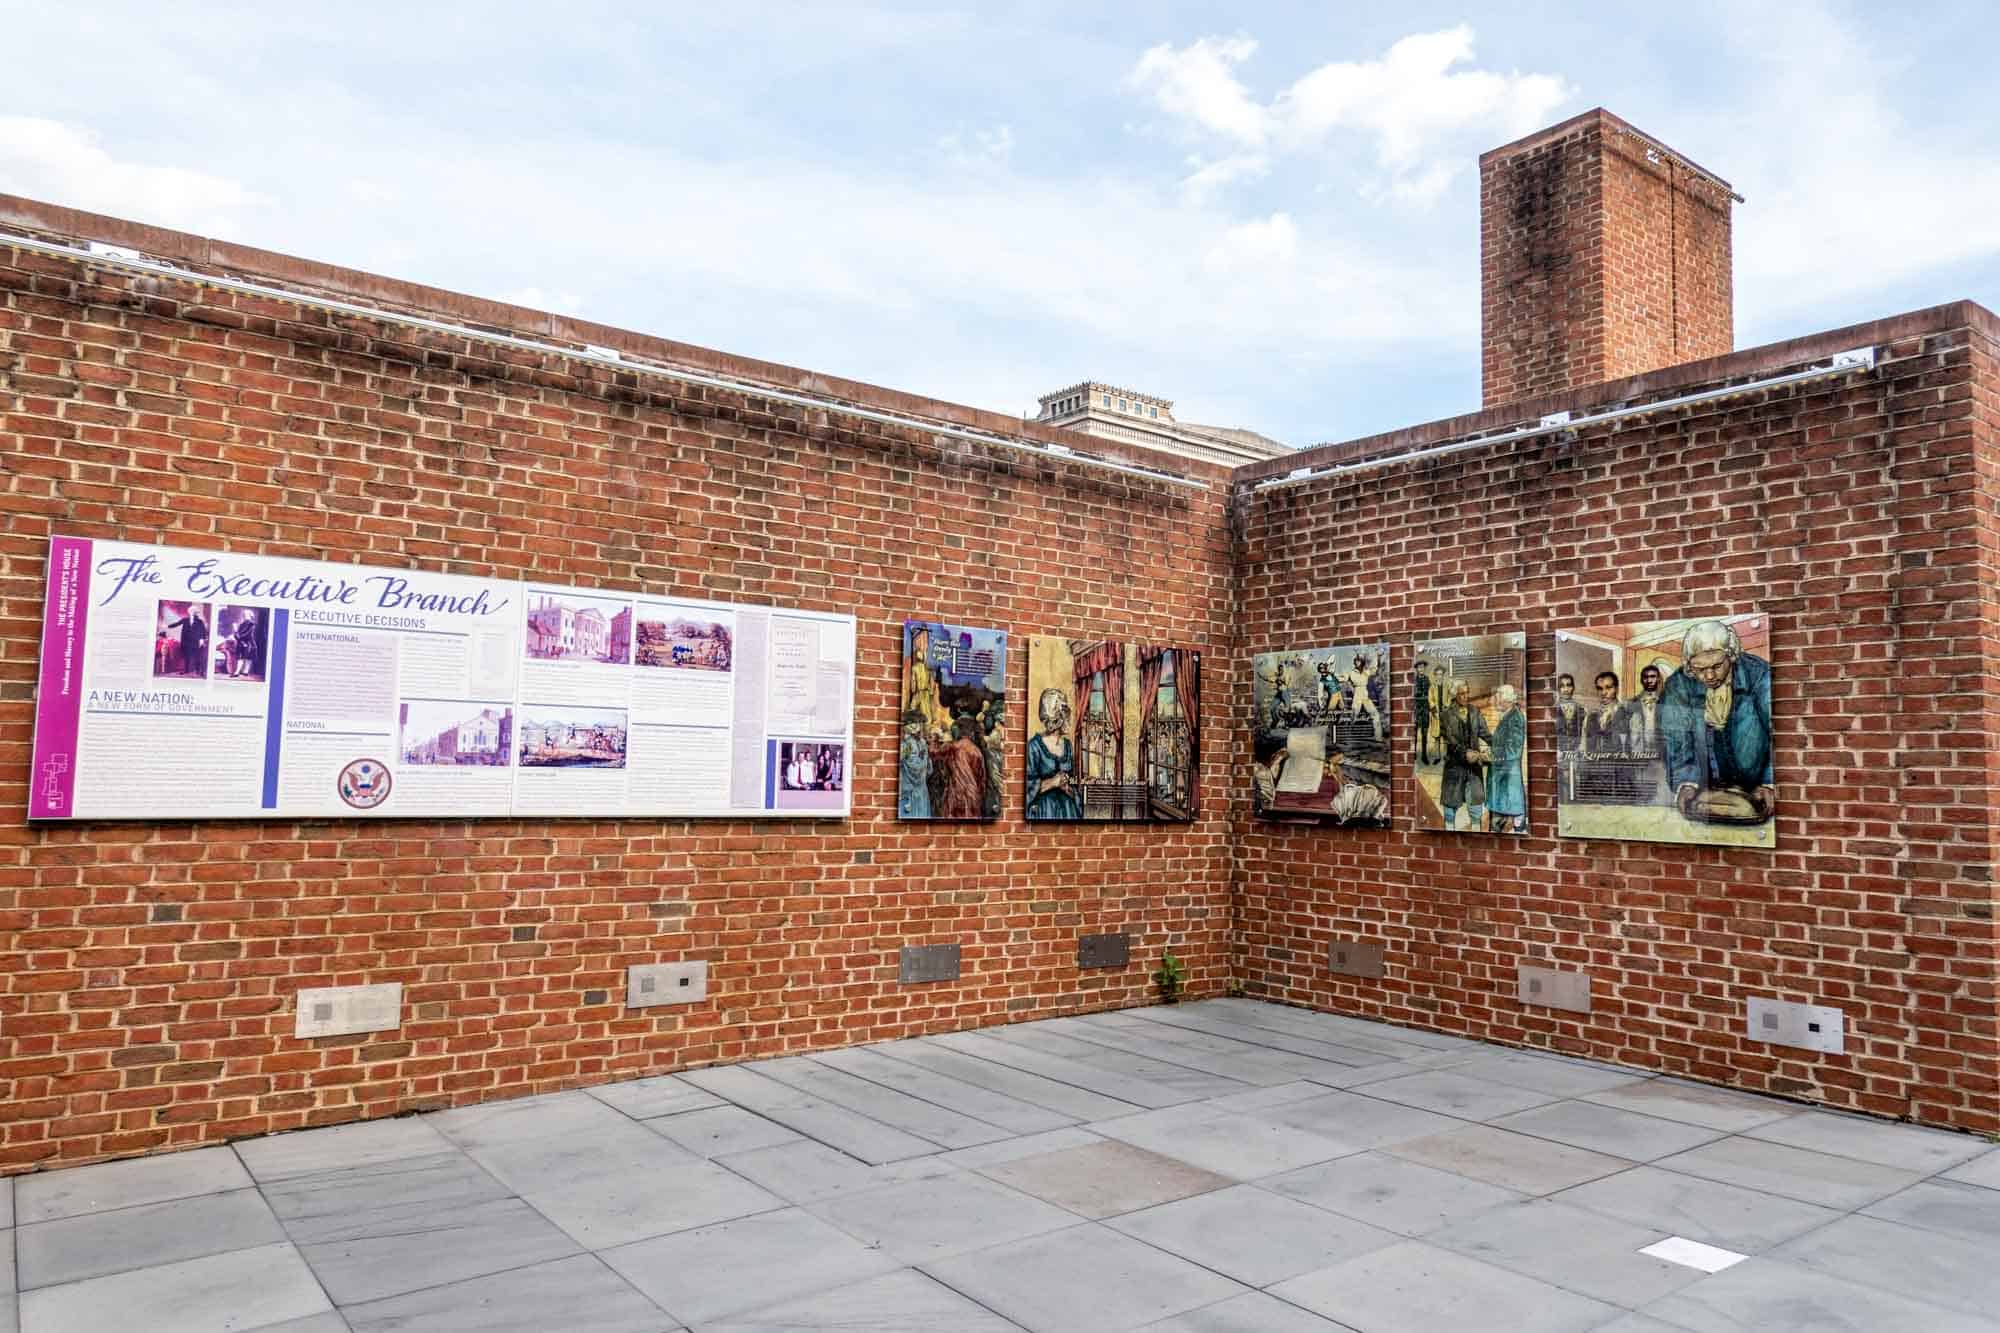 Open-air exhibit including information panels on a brick wall.